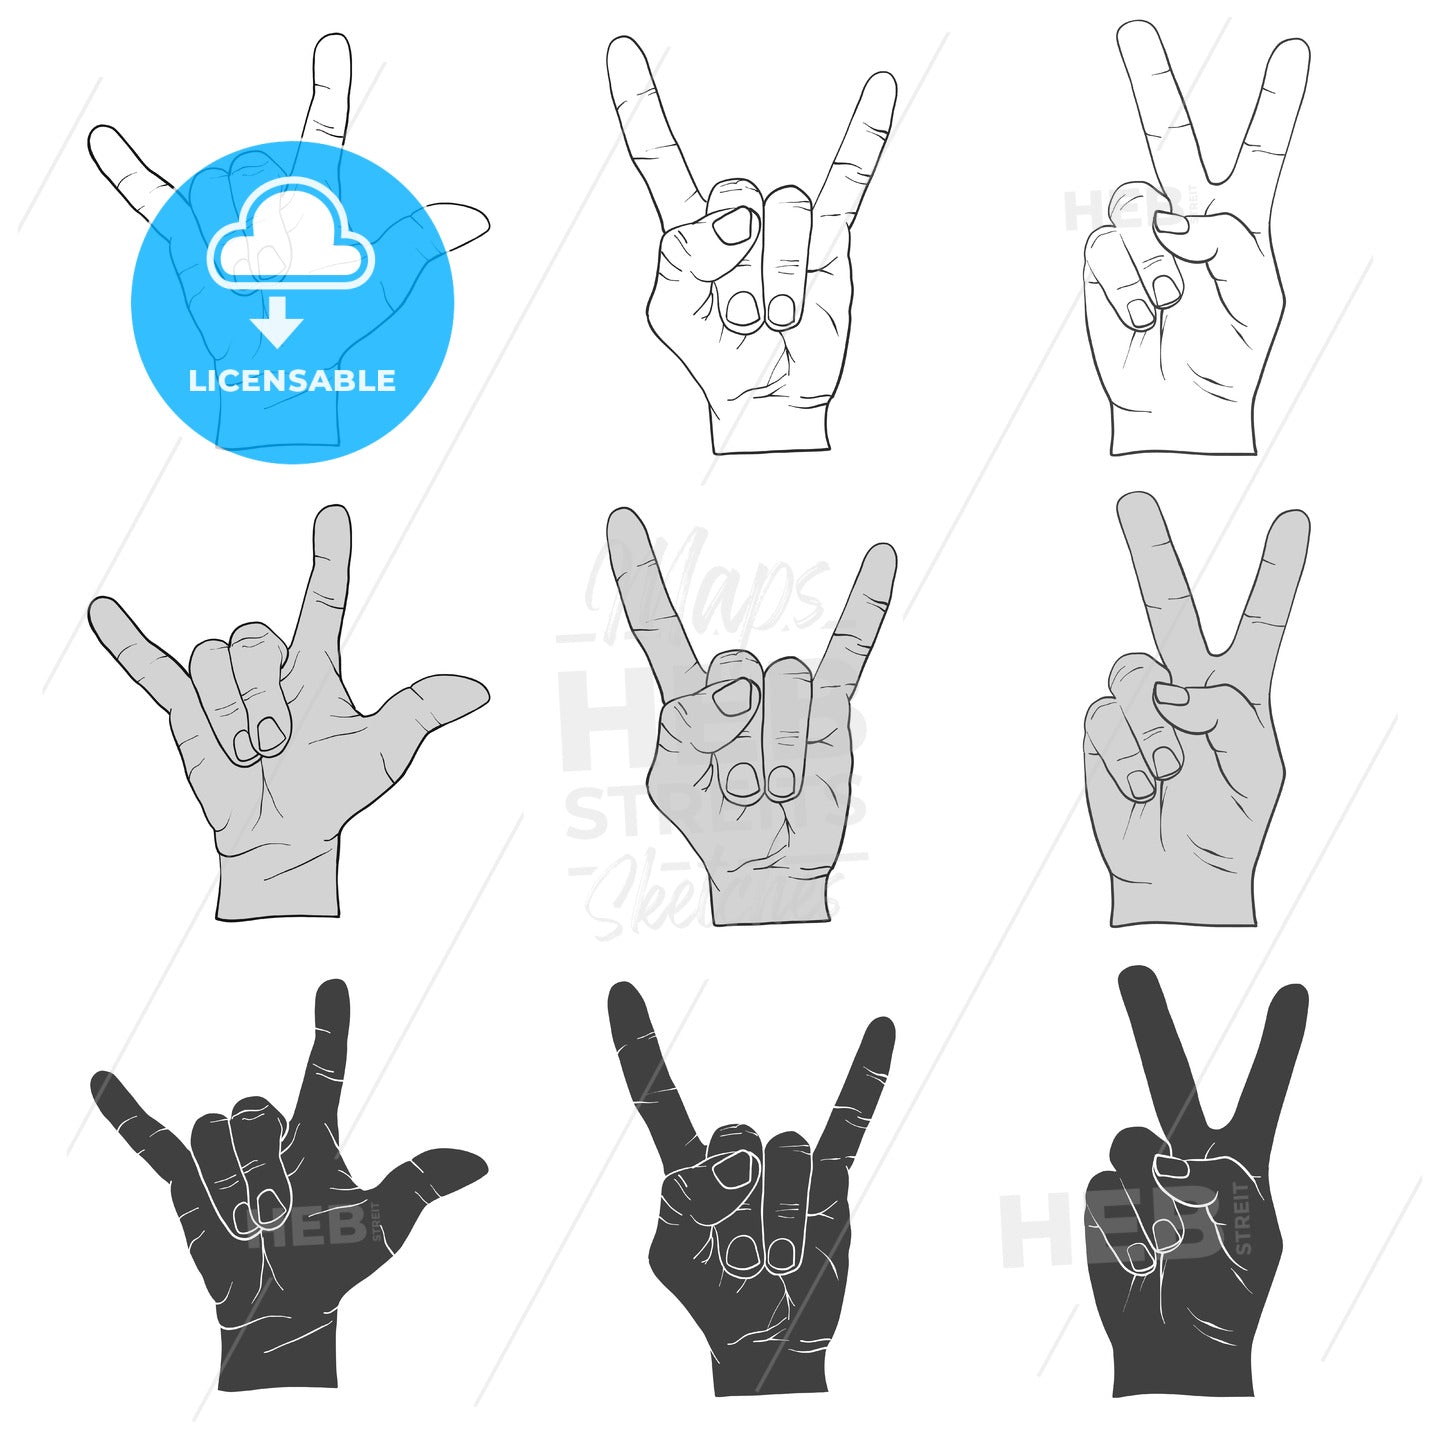 Three Hand Signs Gestures Outline and Filled – instant download